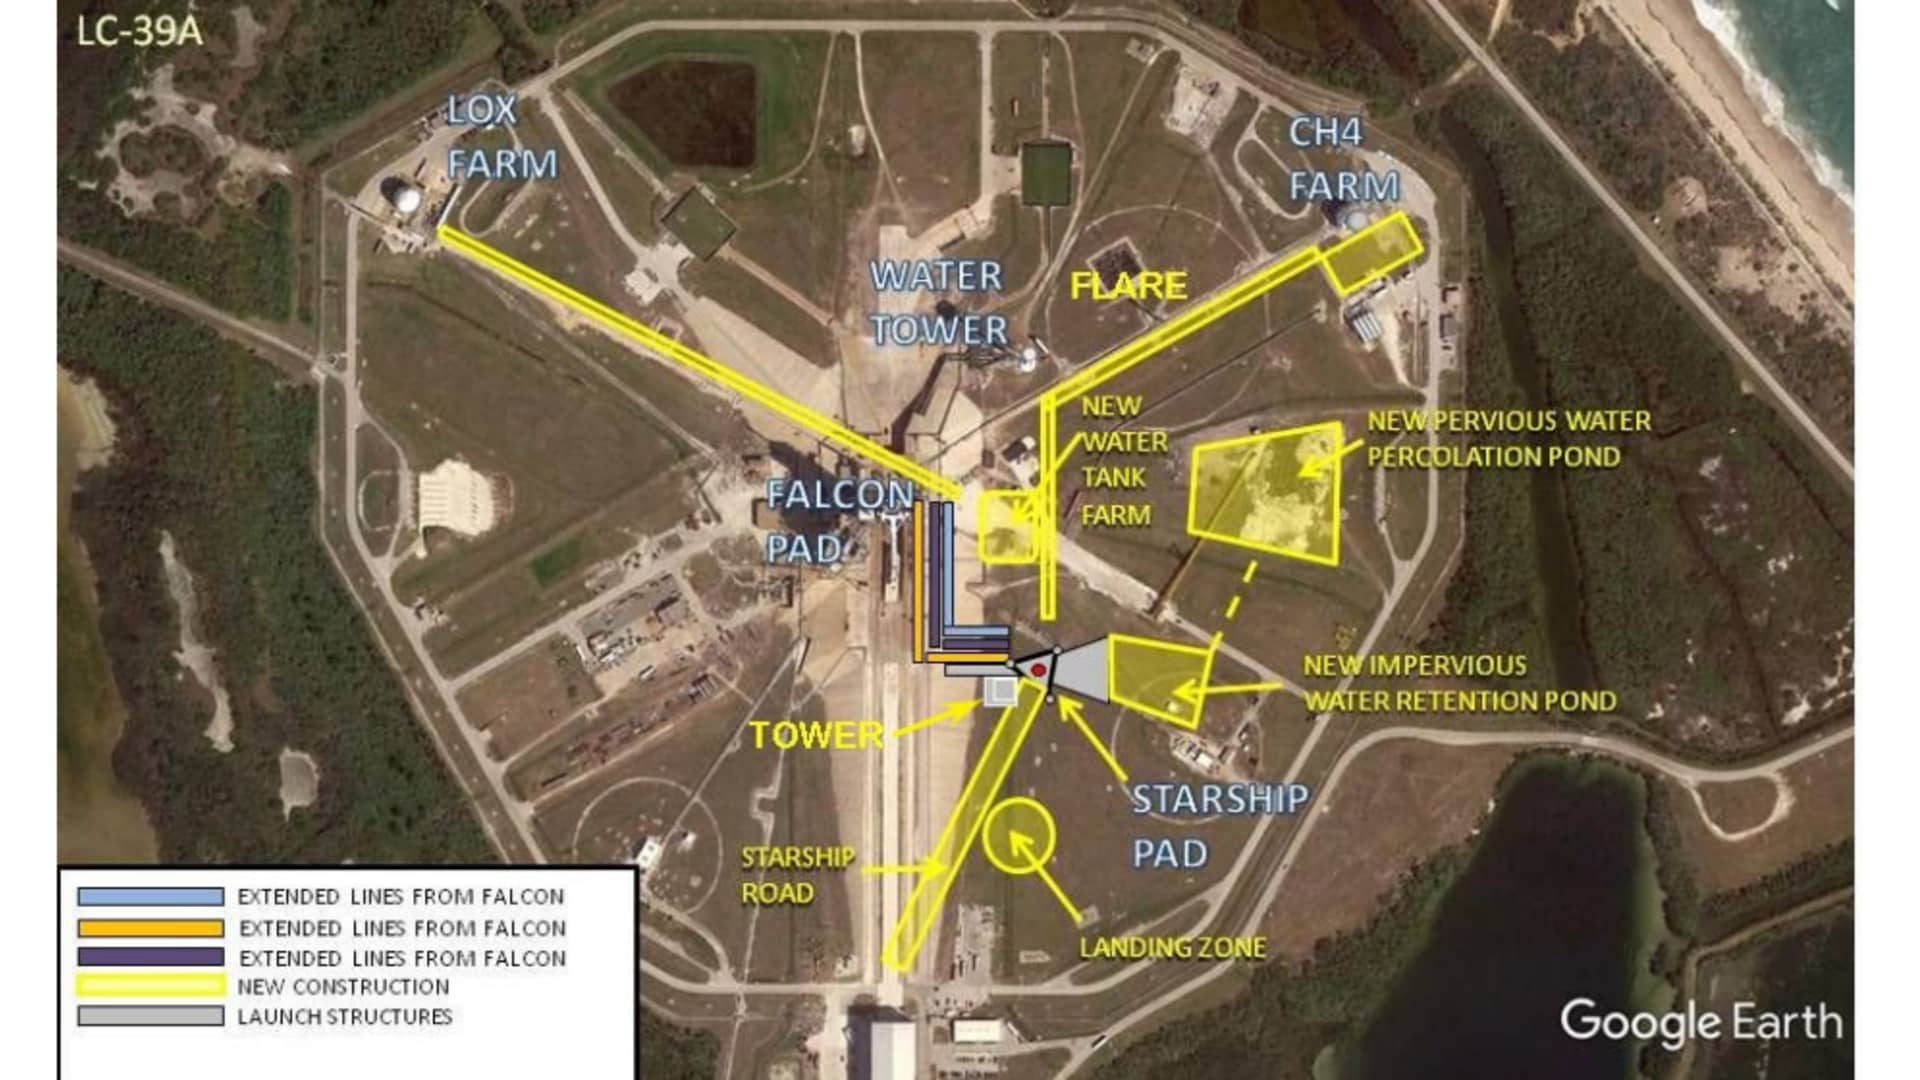 An image from NASA's 2019 environmental assessment of the SpaceX proposal to add launchpad infrastructure for Starship to Launch Complex 39A at Kennedy Space Center in Florida.